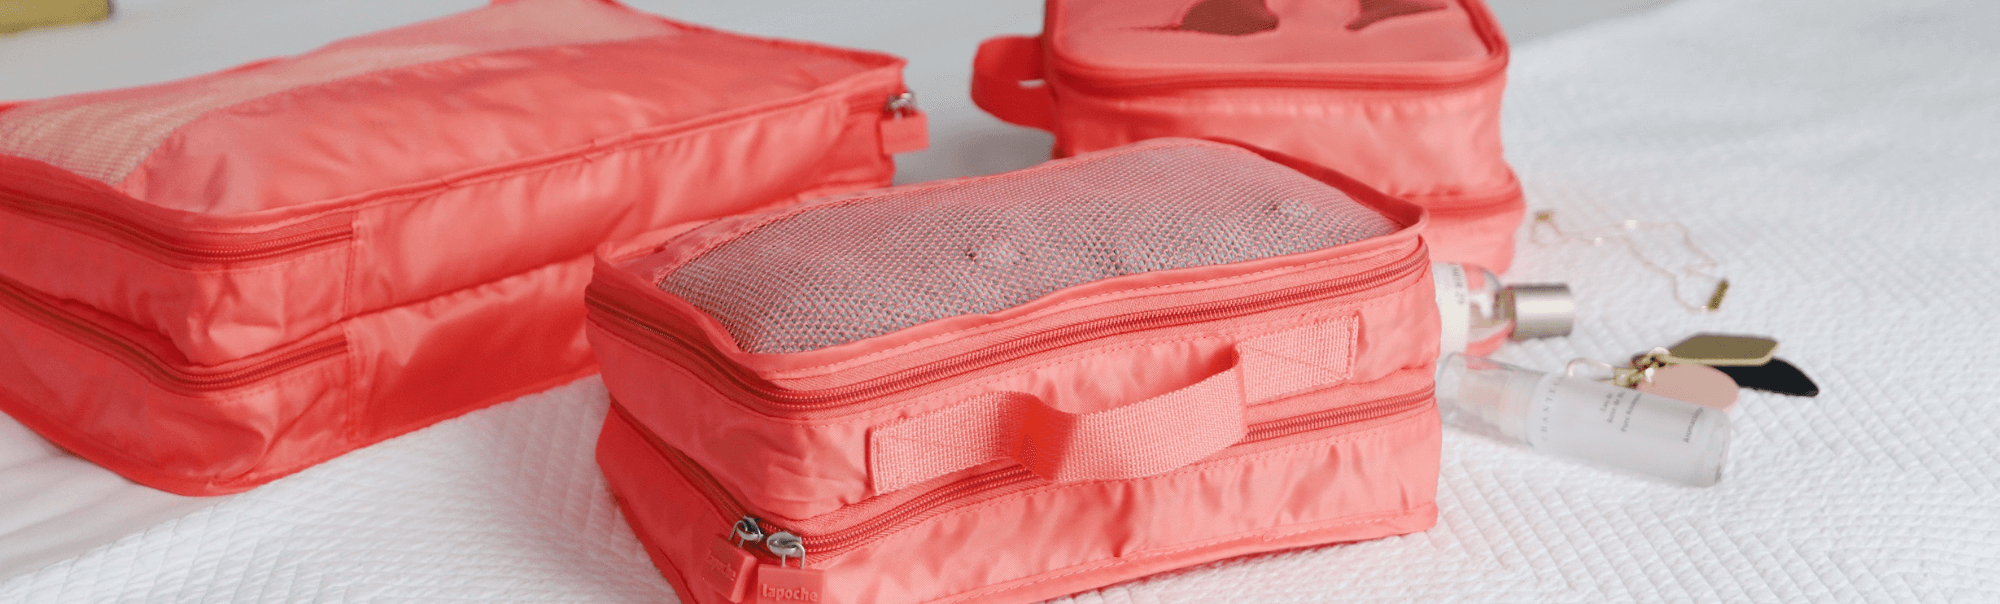 Luggage & Suitcase Organisers for Travel | Lapoche